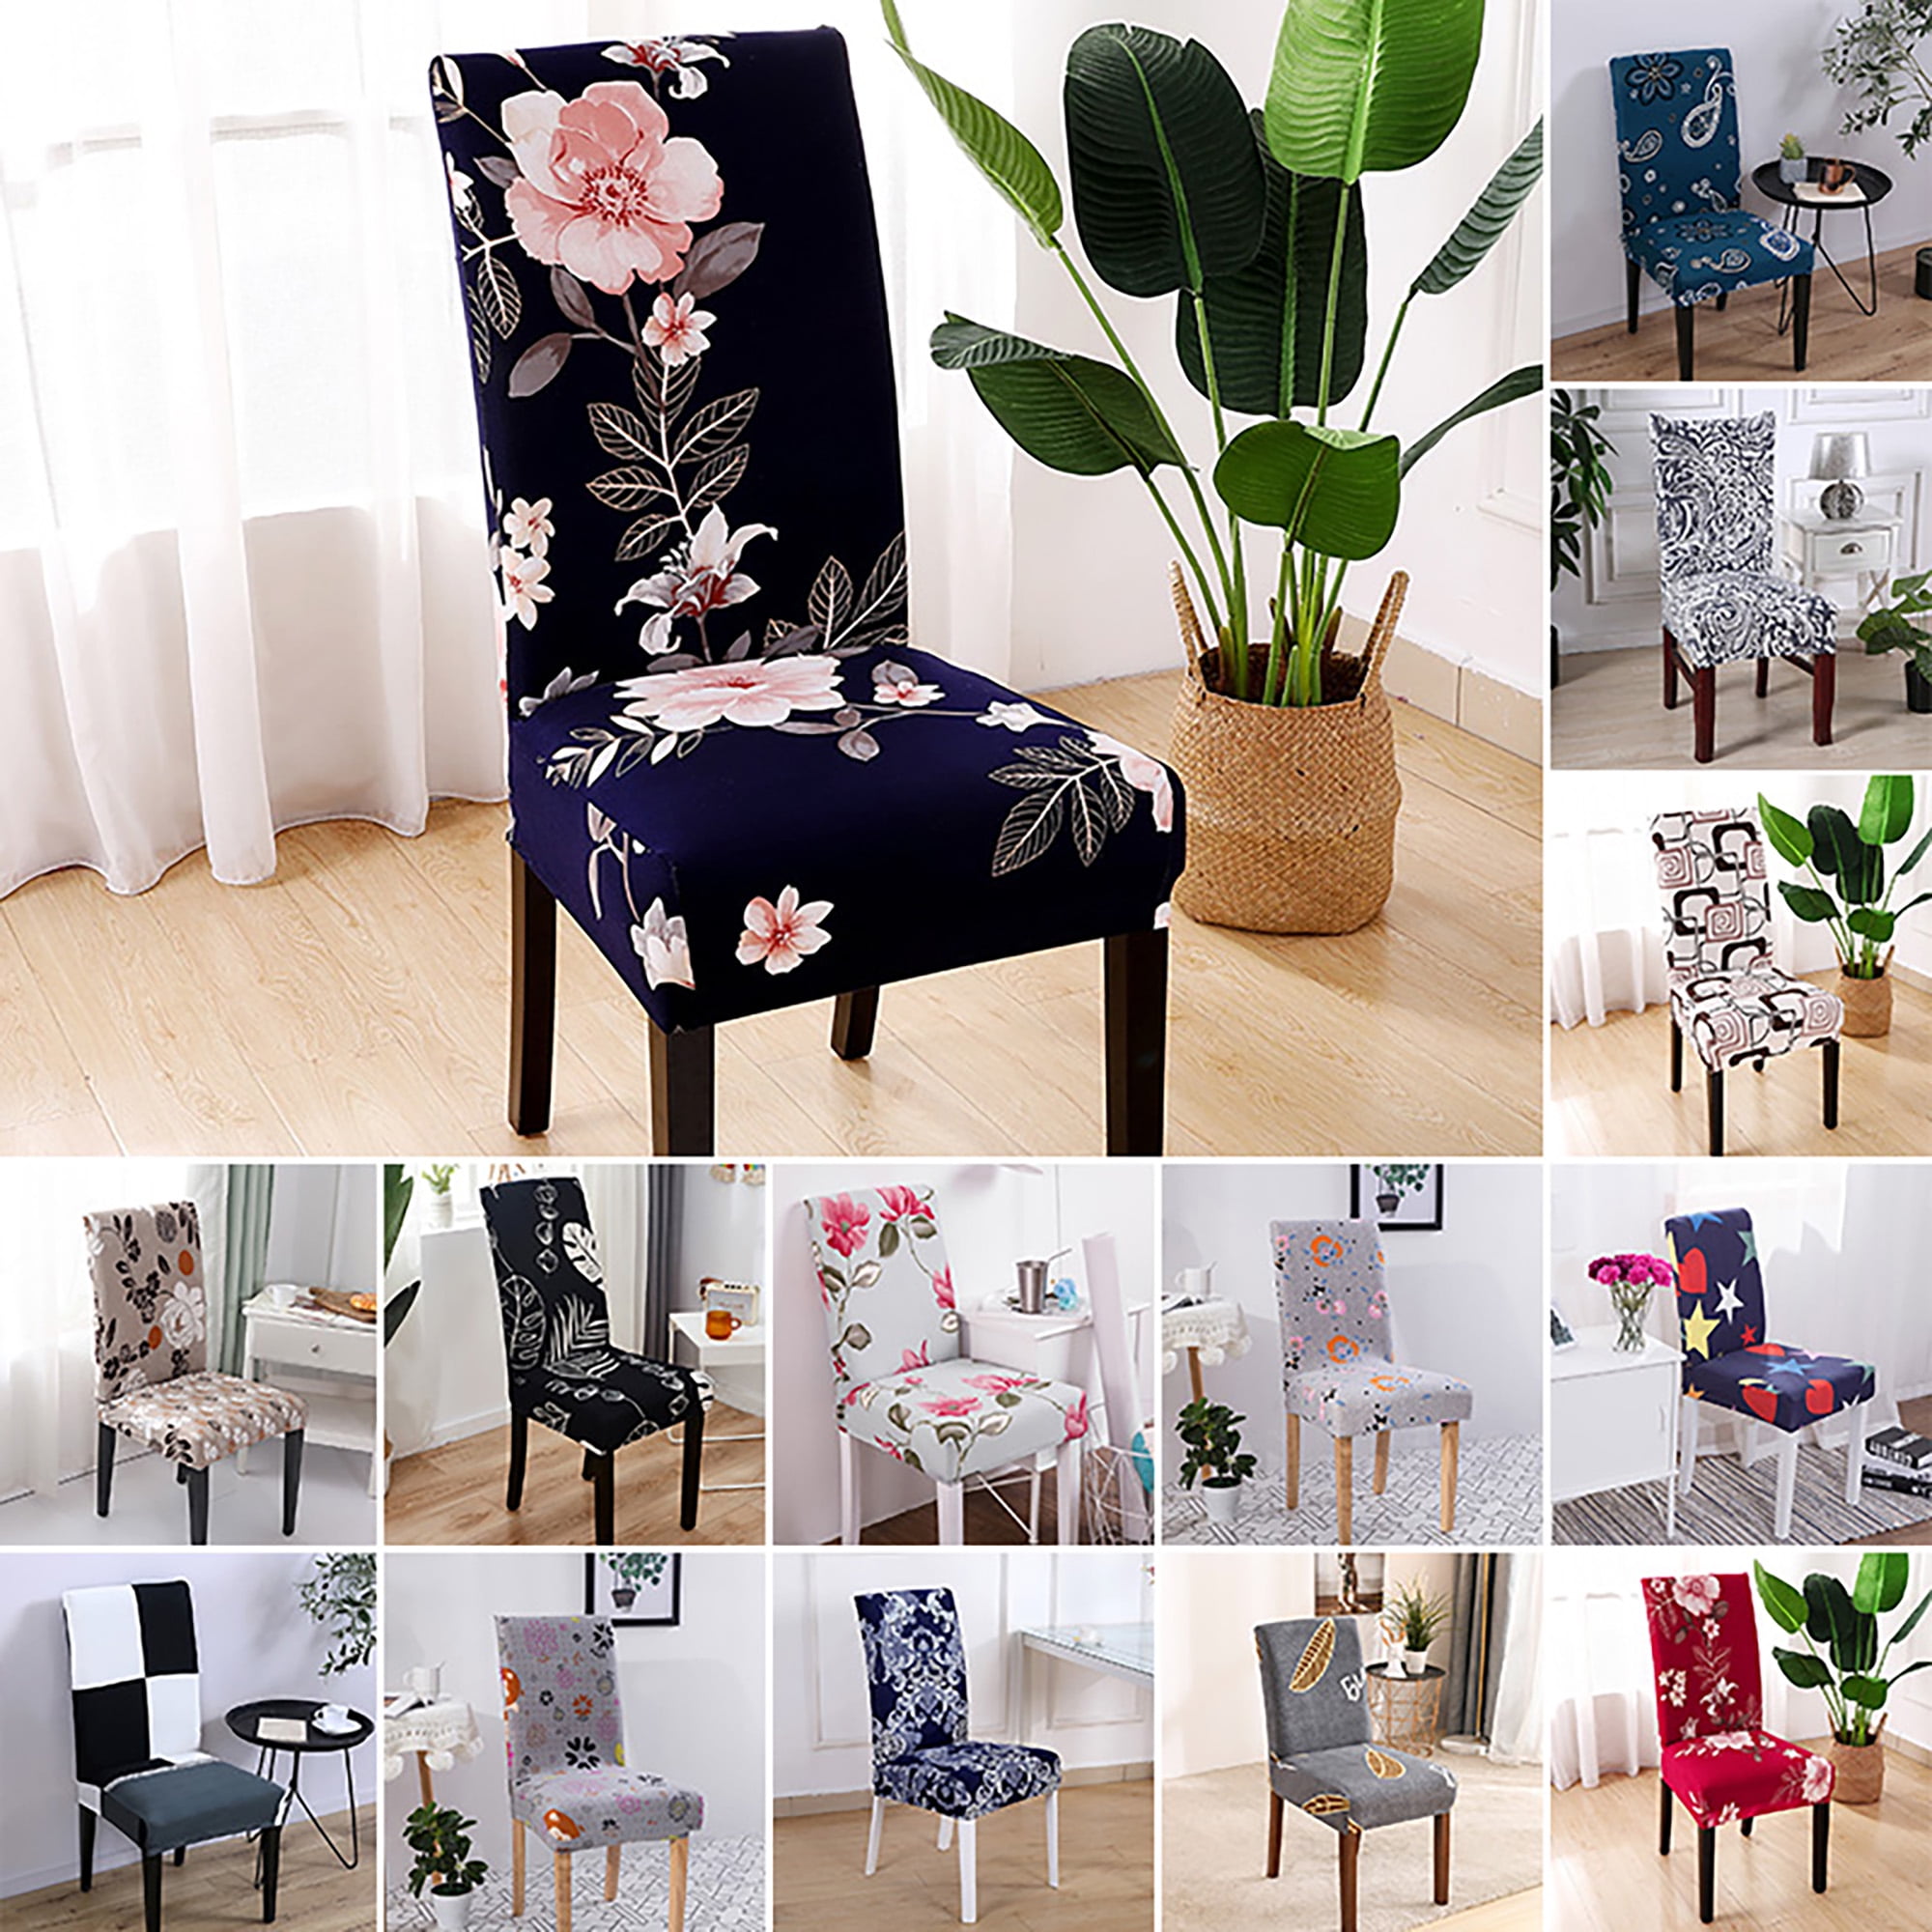 Dining Chair Covers Floral Printed Slipcover Seat Cover Wedding Party Decor S